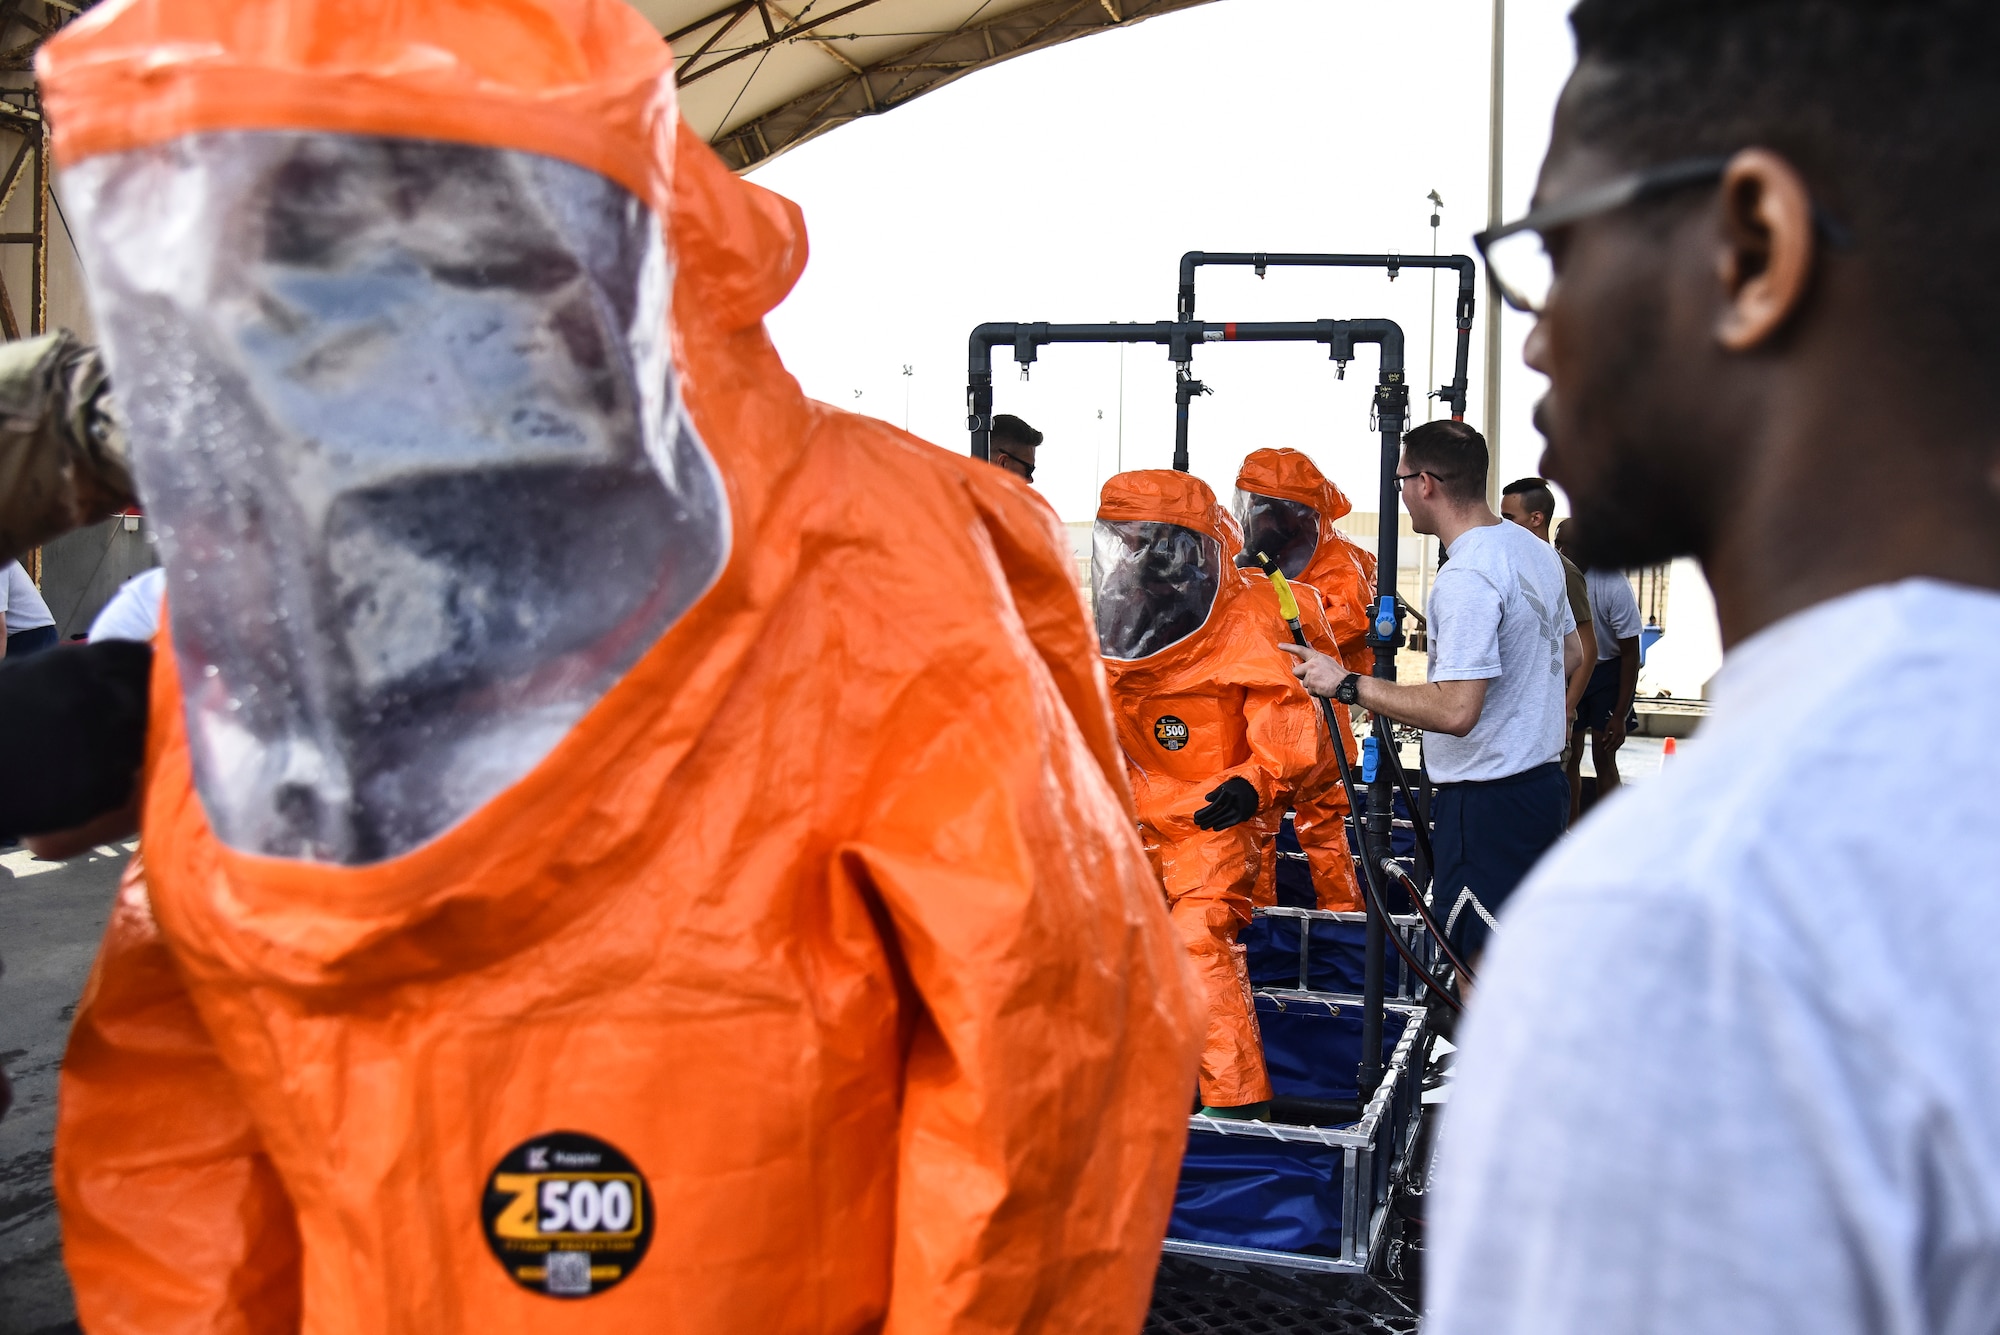 U.S. Airmen assigned to the 380th Expeditionary Civil Engineer Squadron Fire Department process through a technical decontamination during a hazardous materials exercise at Al Dhafra Air Base, United Arab Emirates, Jan. 4, 2019. The 380th ECES Fire Department and Emergency Management flights conducted a joint-agency hazardous material exercise for training purposes. (U.S. Air Force photo by Senior Airman Mya M. Crosby)